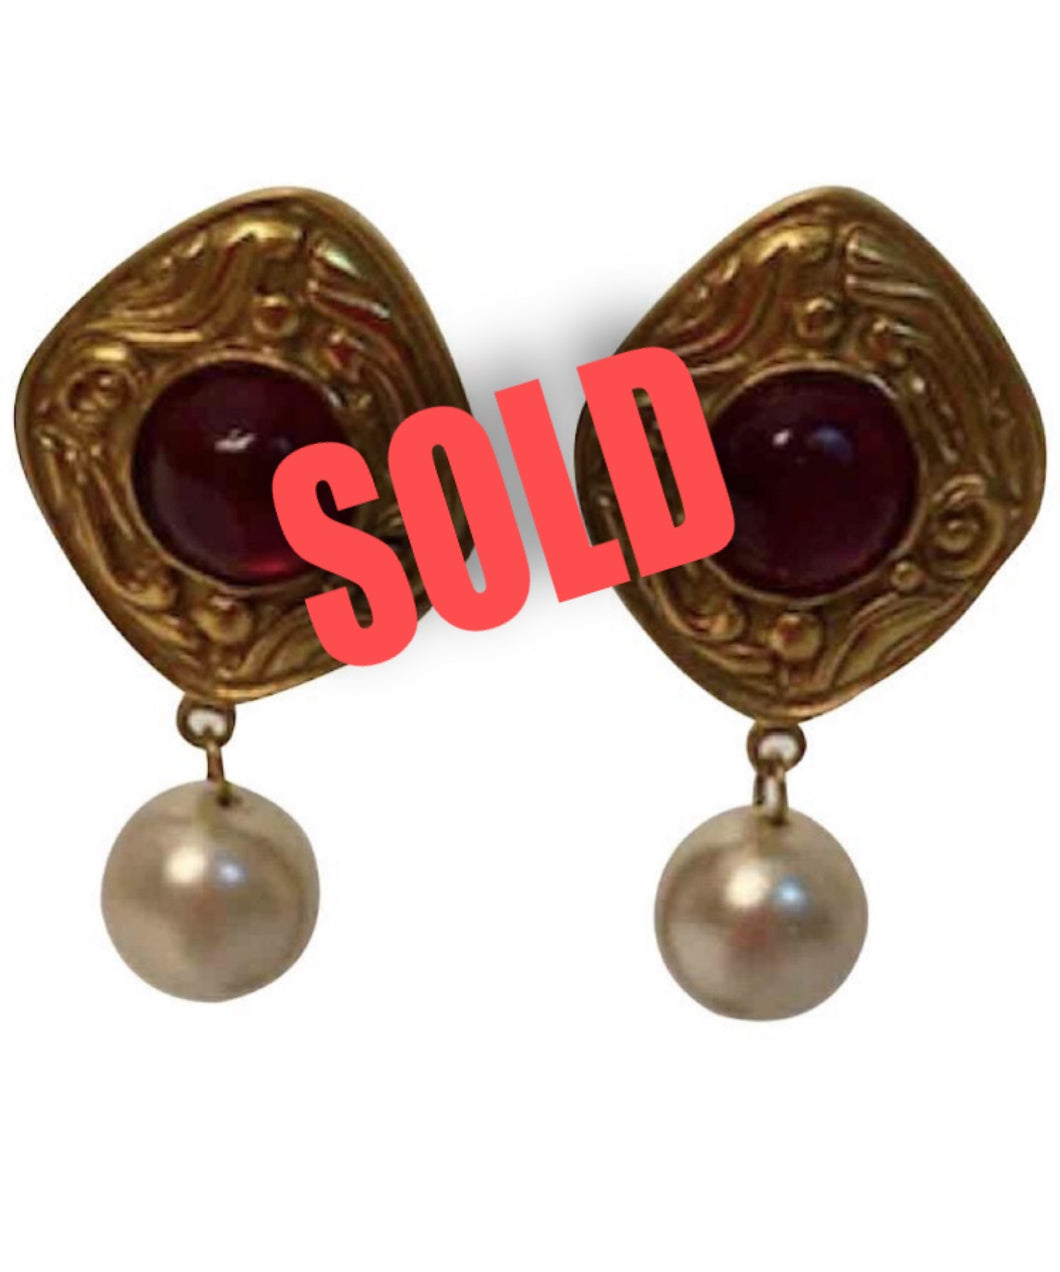 HOLD for EVE – Chanel Earrings with Red Gripoix Glass Cabochons - Ruby Lane